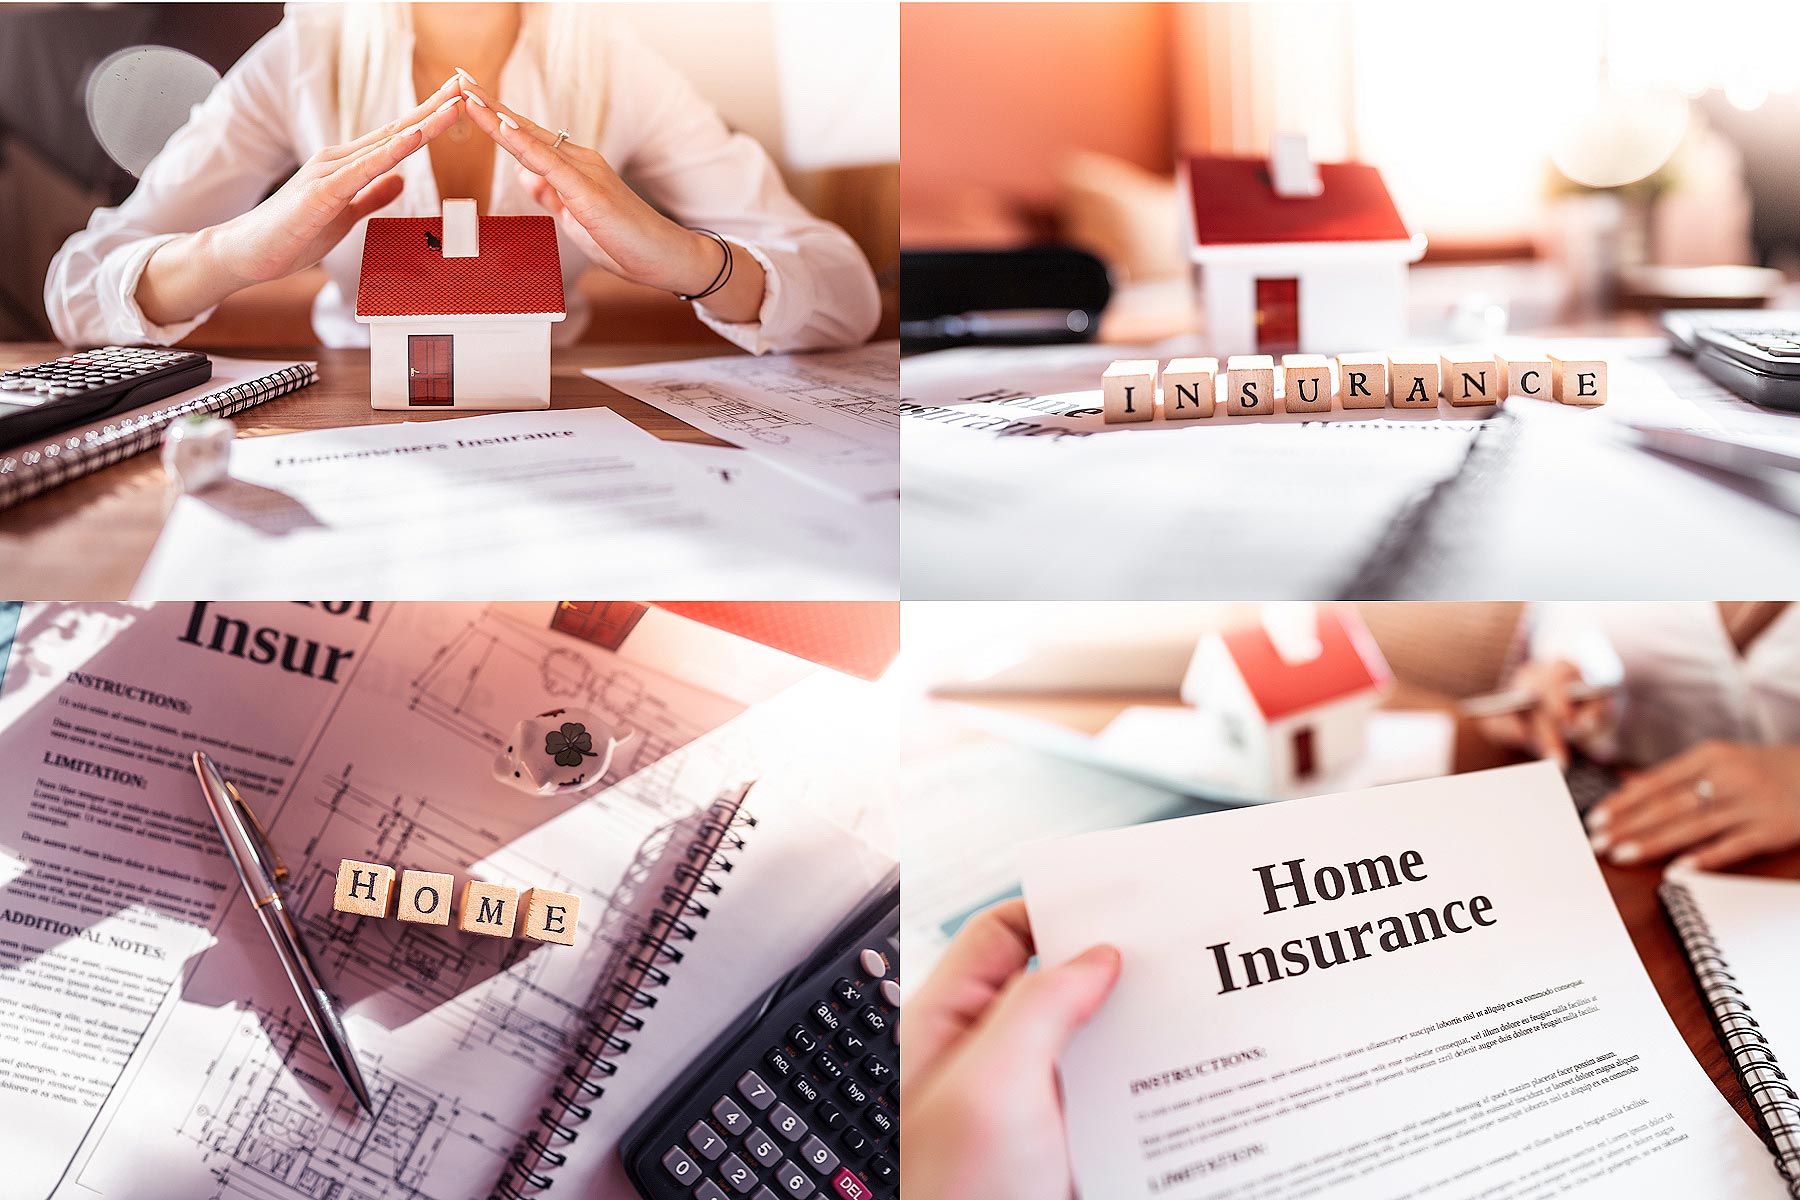 What are the types of insurance?